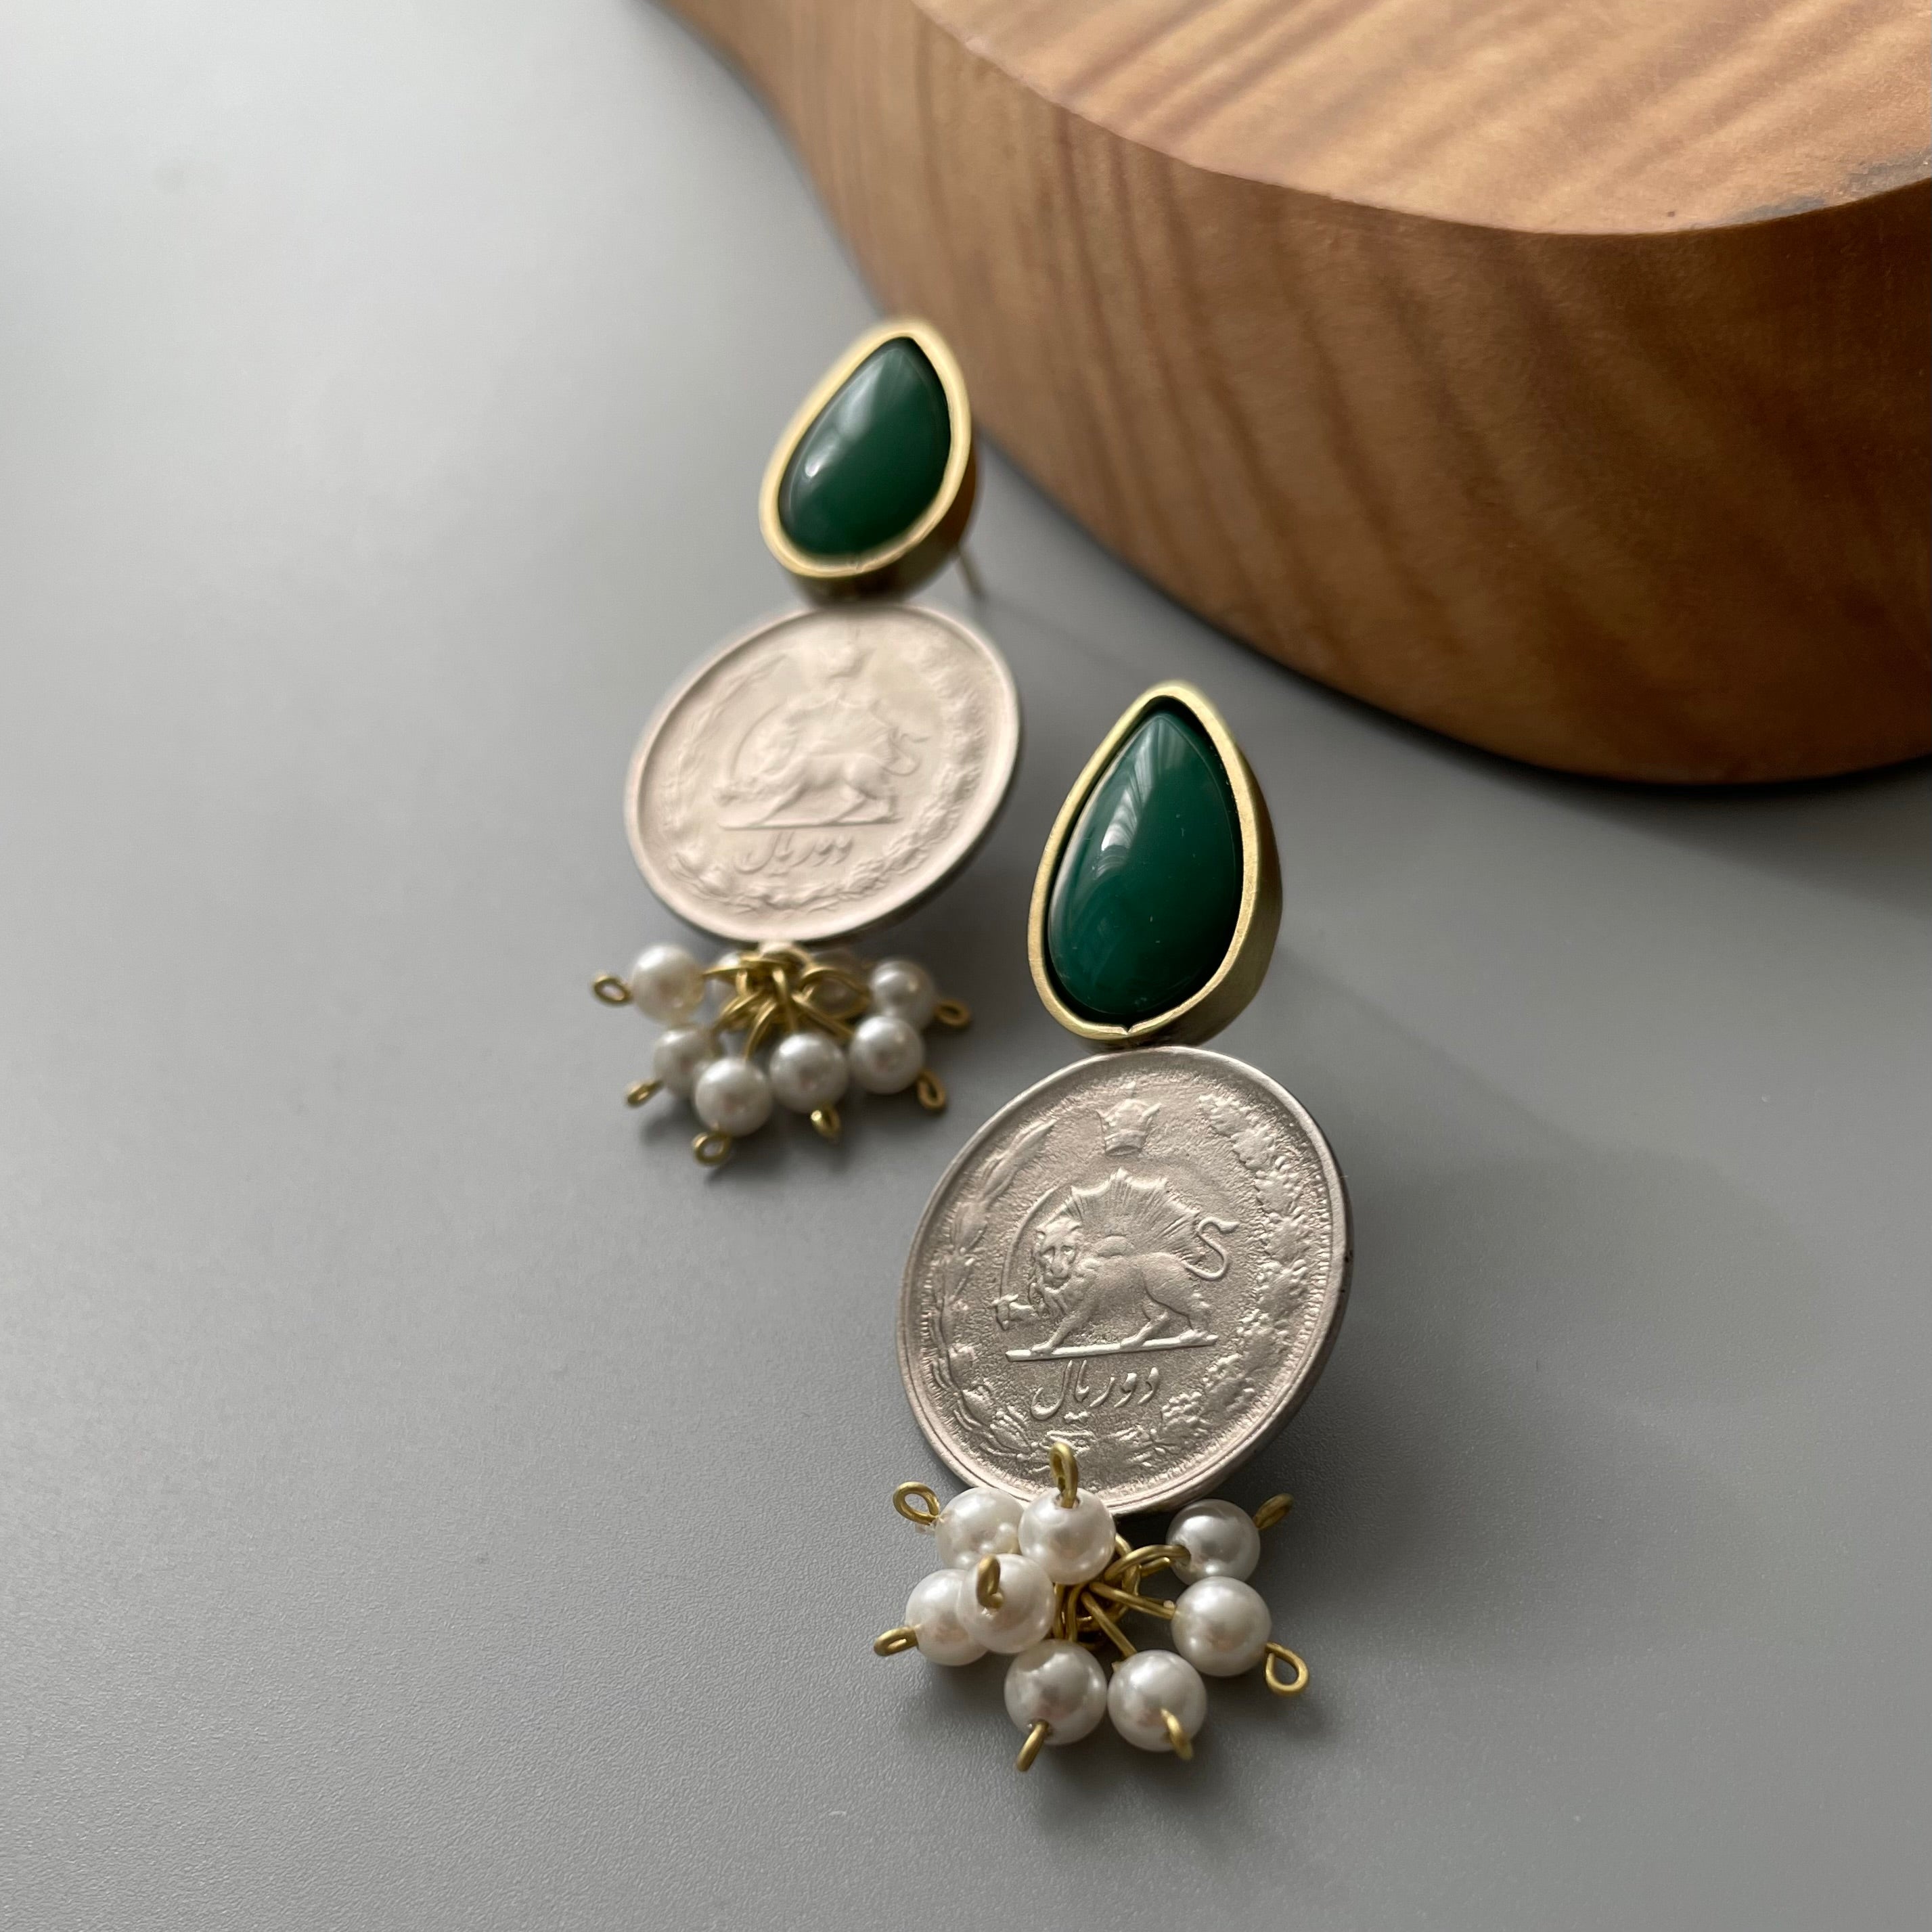 Persian Earrings-Brass Earrings with Pahlavi Coin and Green Agate:Persian Jewelry-AFRA ART GALLERY